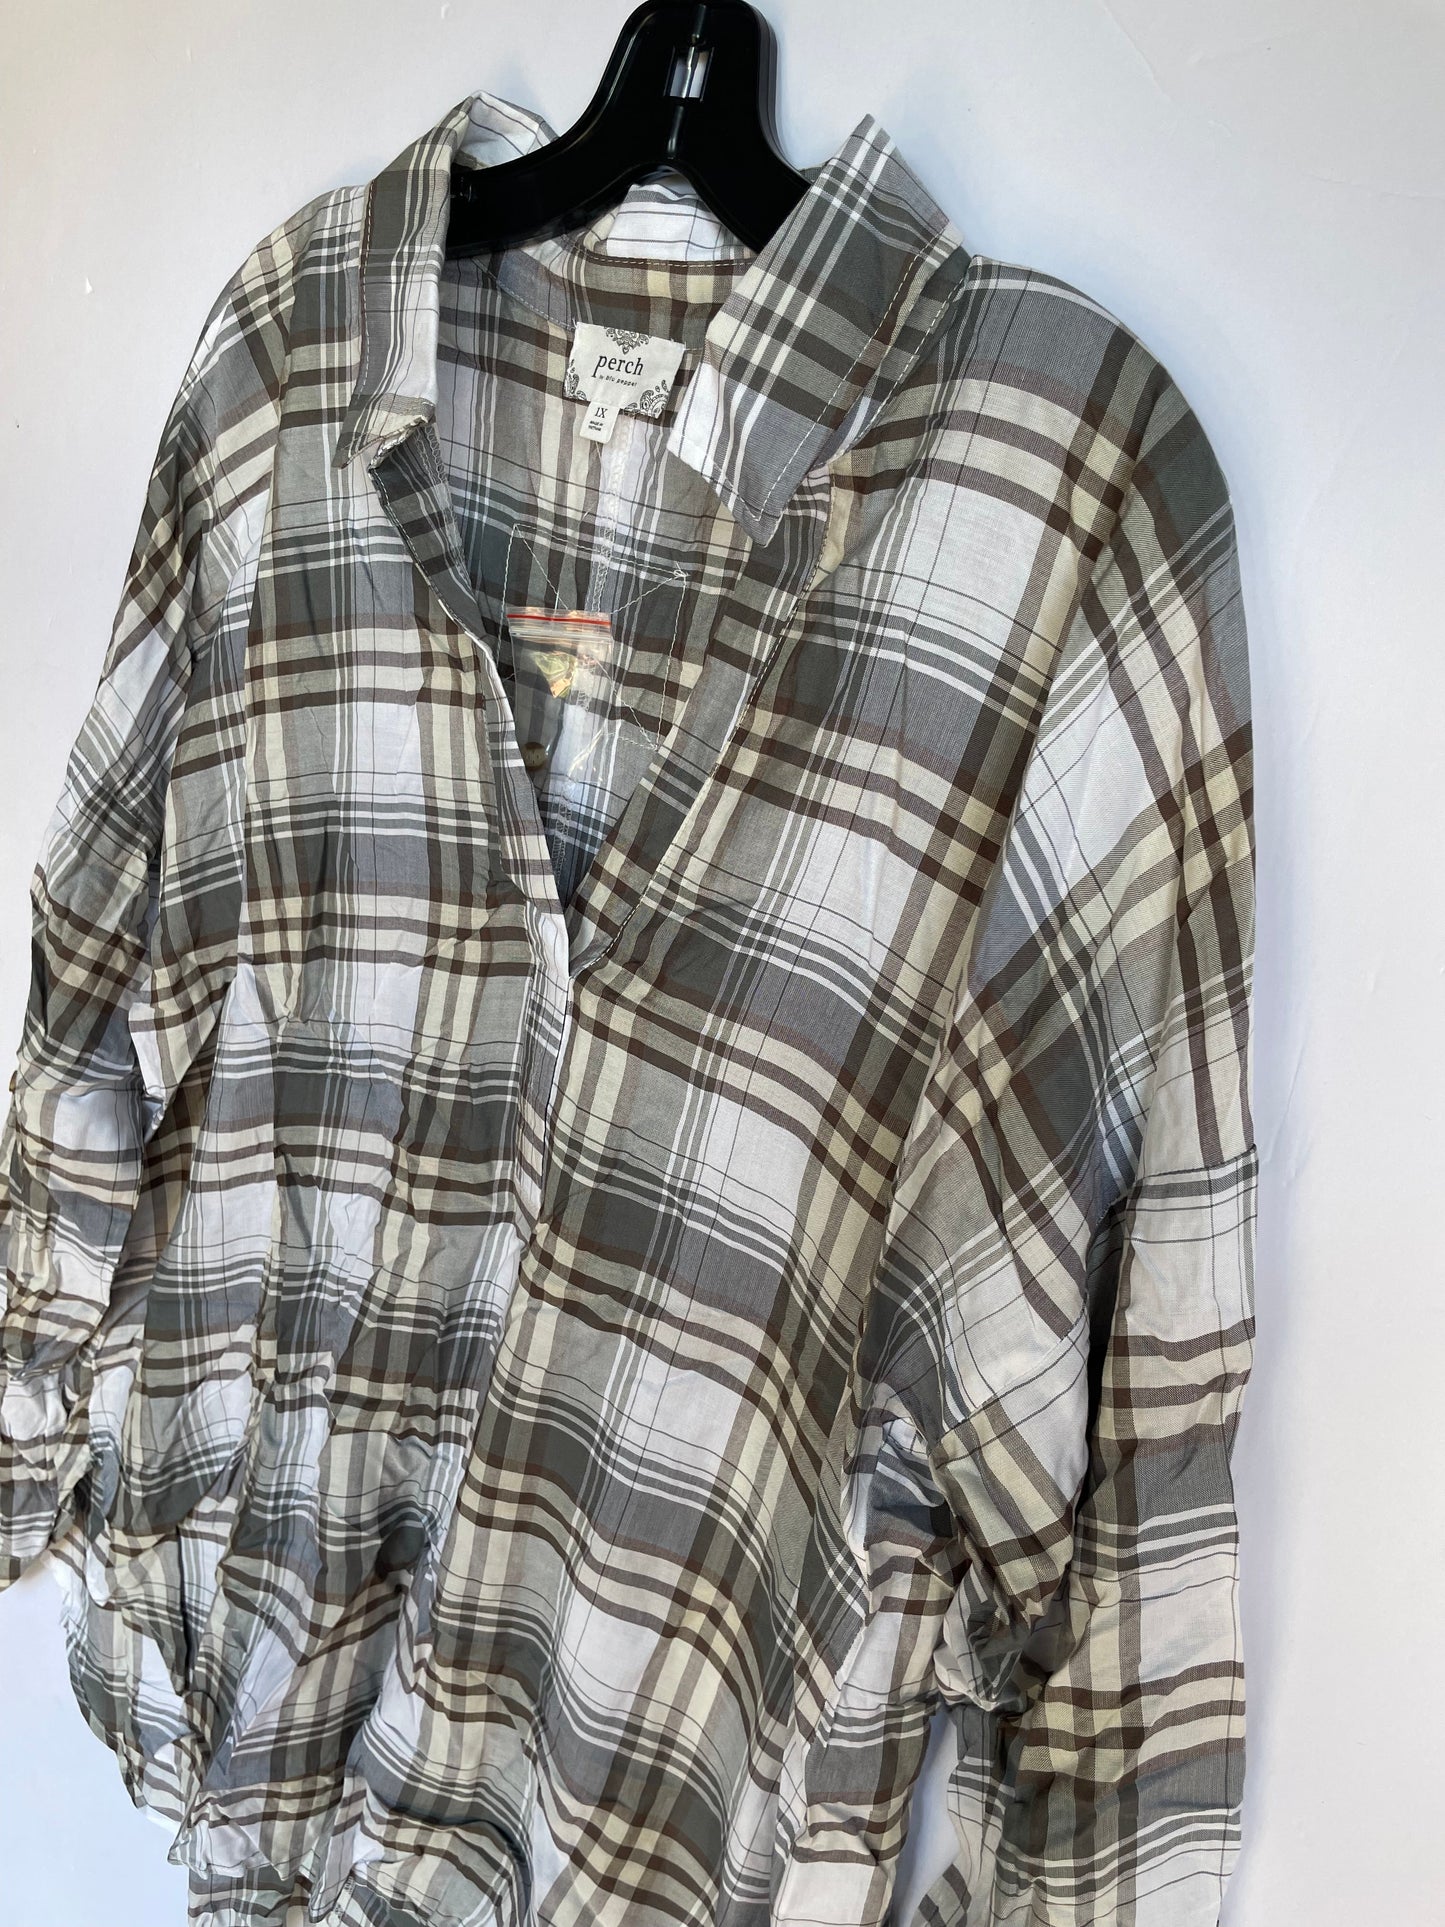 Plaid Pattern Top Long Sleeve Cme, Size 1x